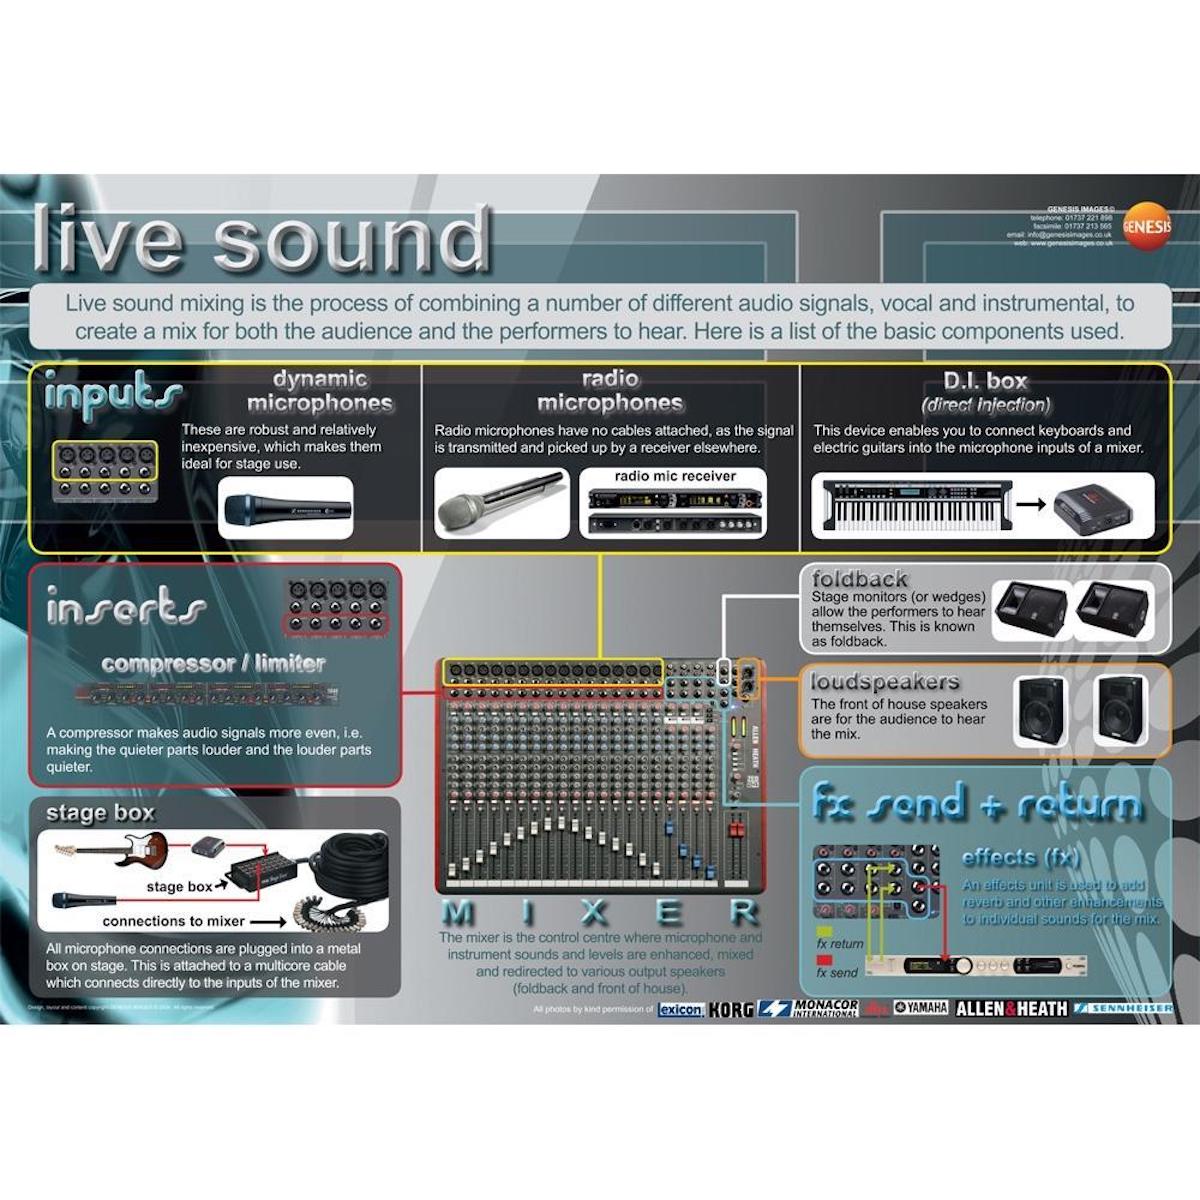 Music technology Live Sound - A1 wall poster